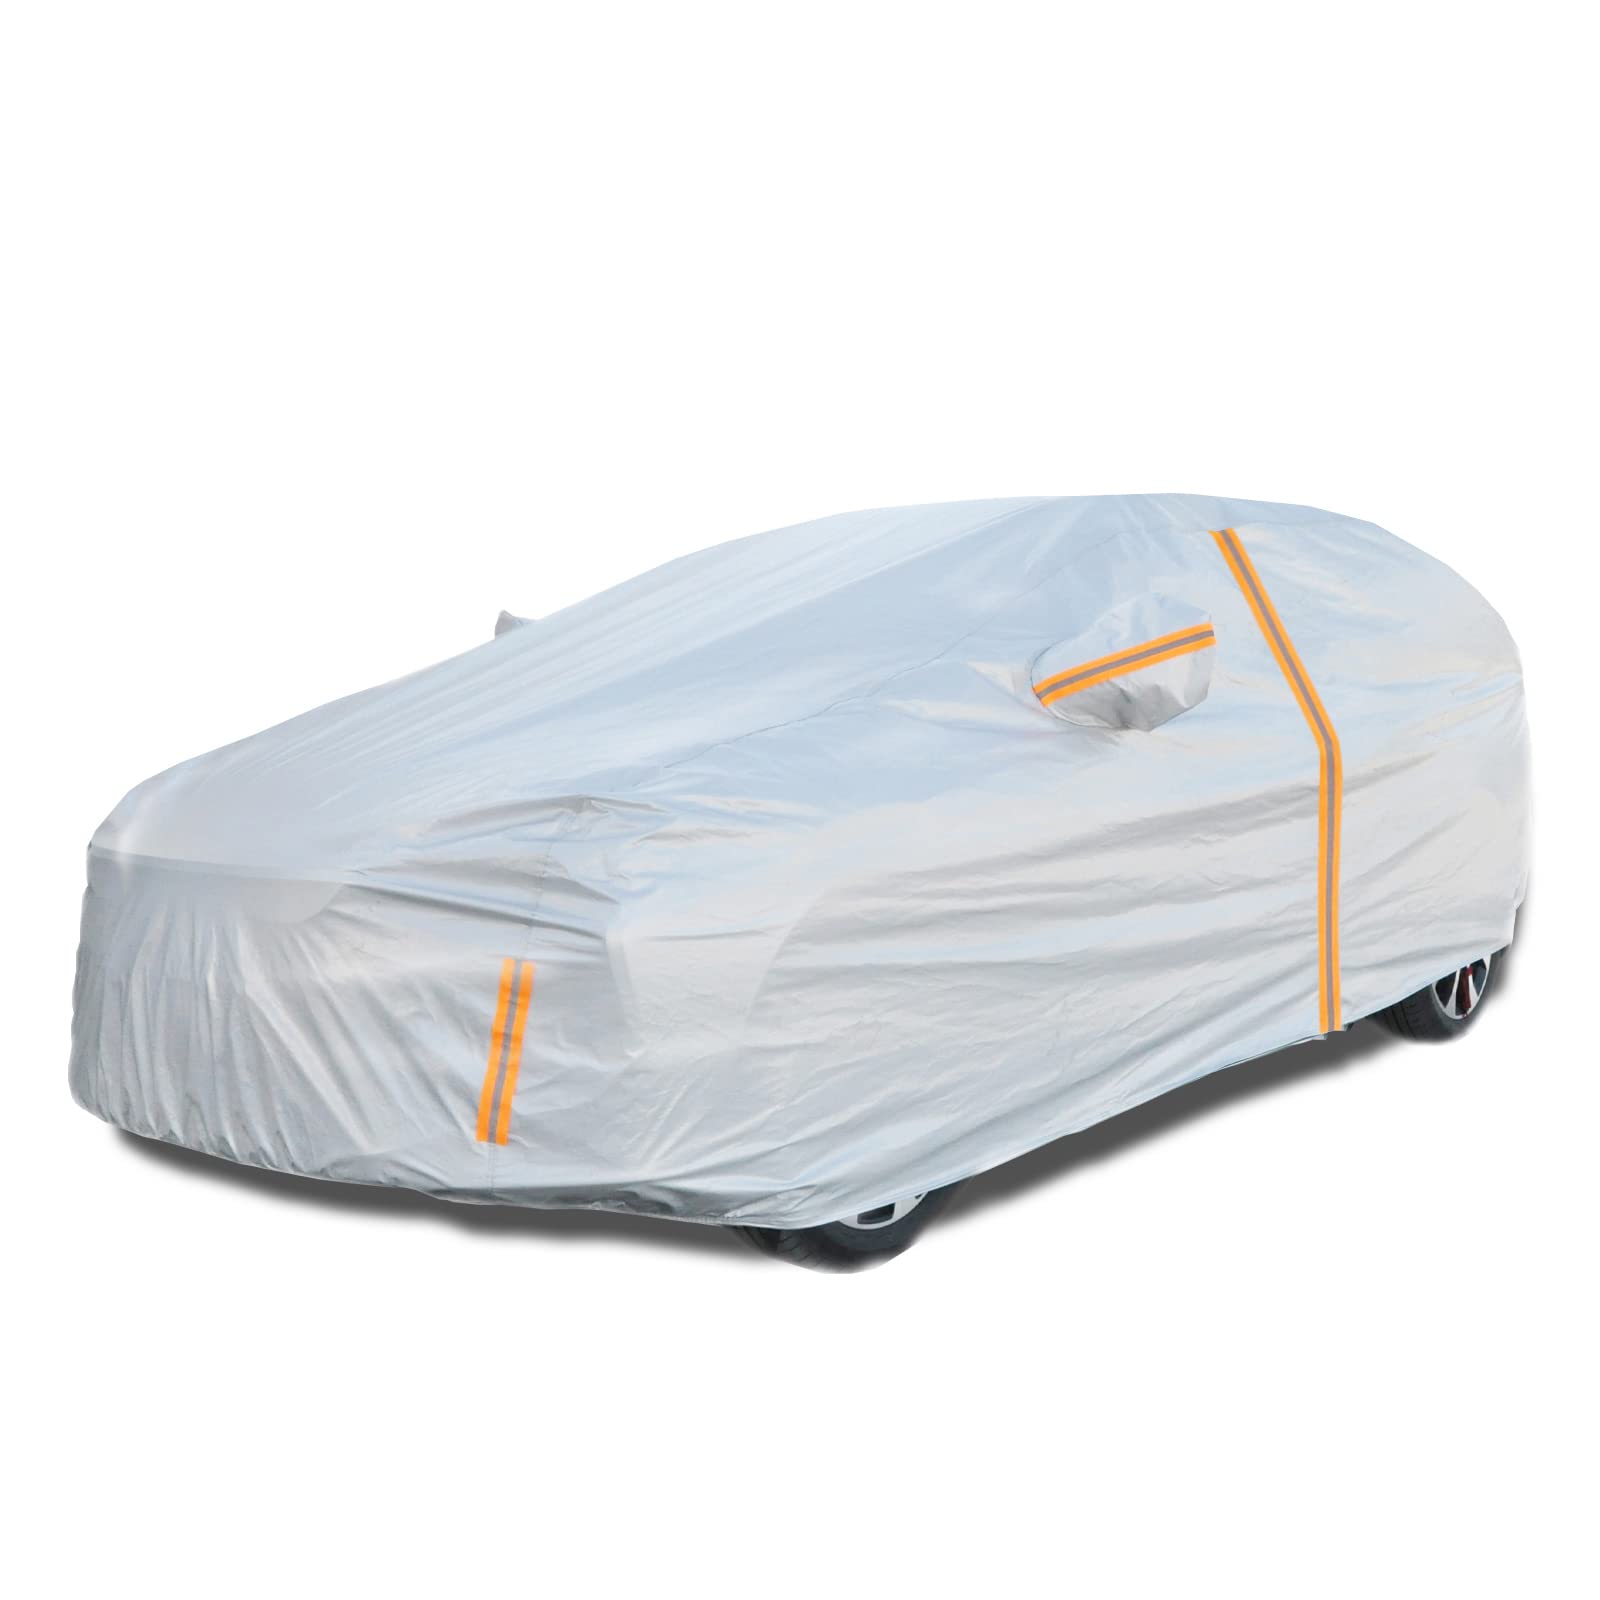 NUOMAN 6 Layers SUV car cover for Automobiles All Weather Waterproof,Outdoor Full cover Sun Rain Hail UV Protection with Zipper 